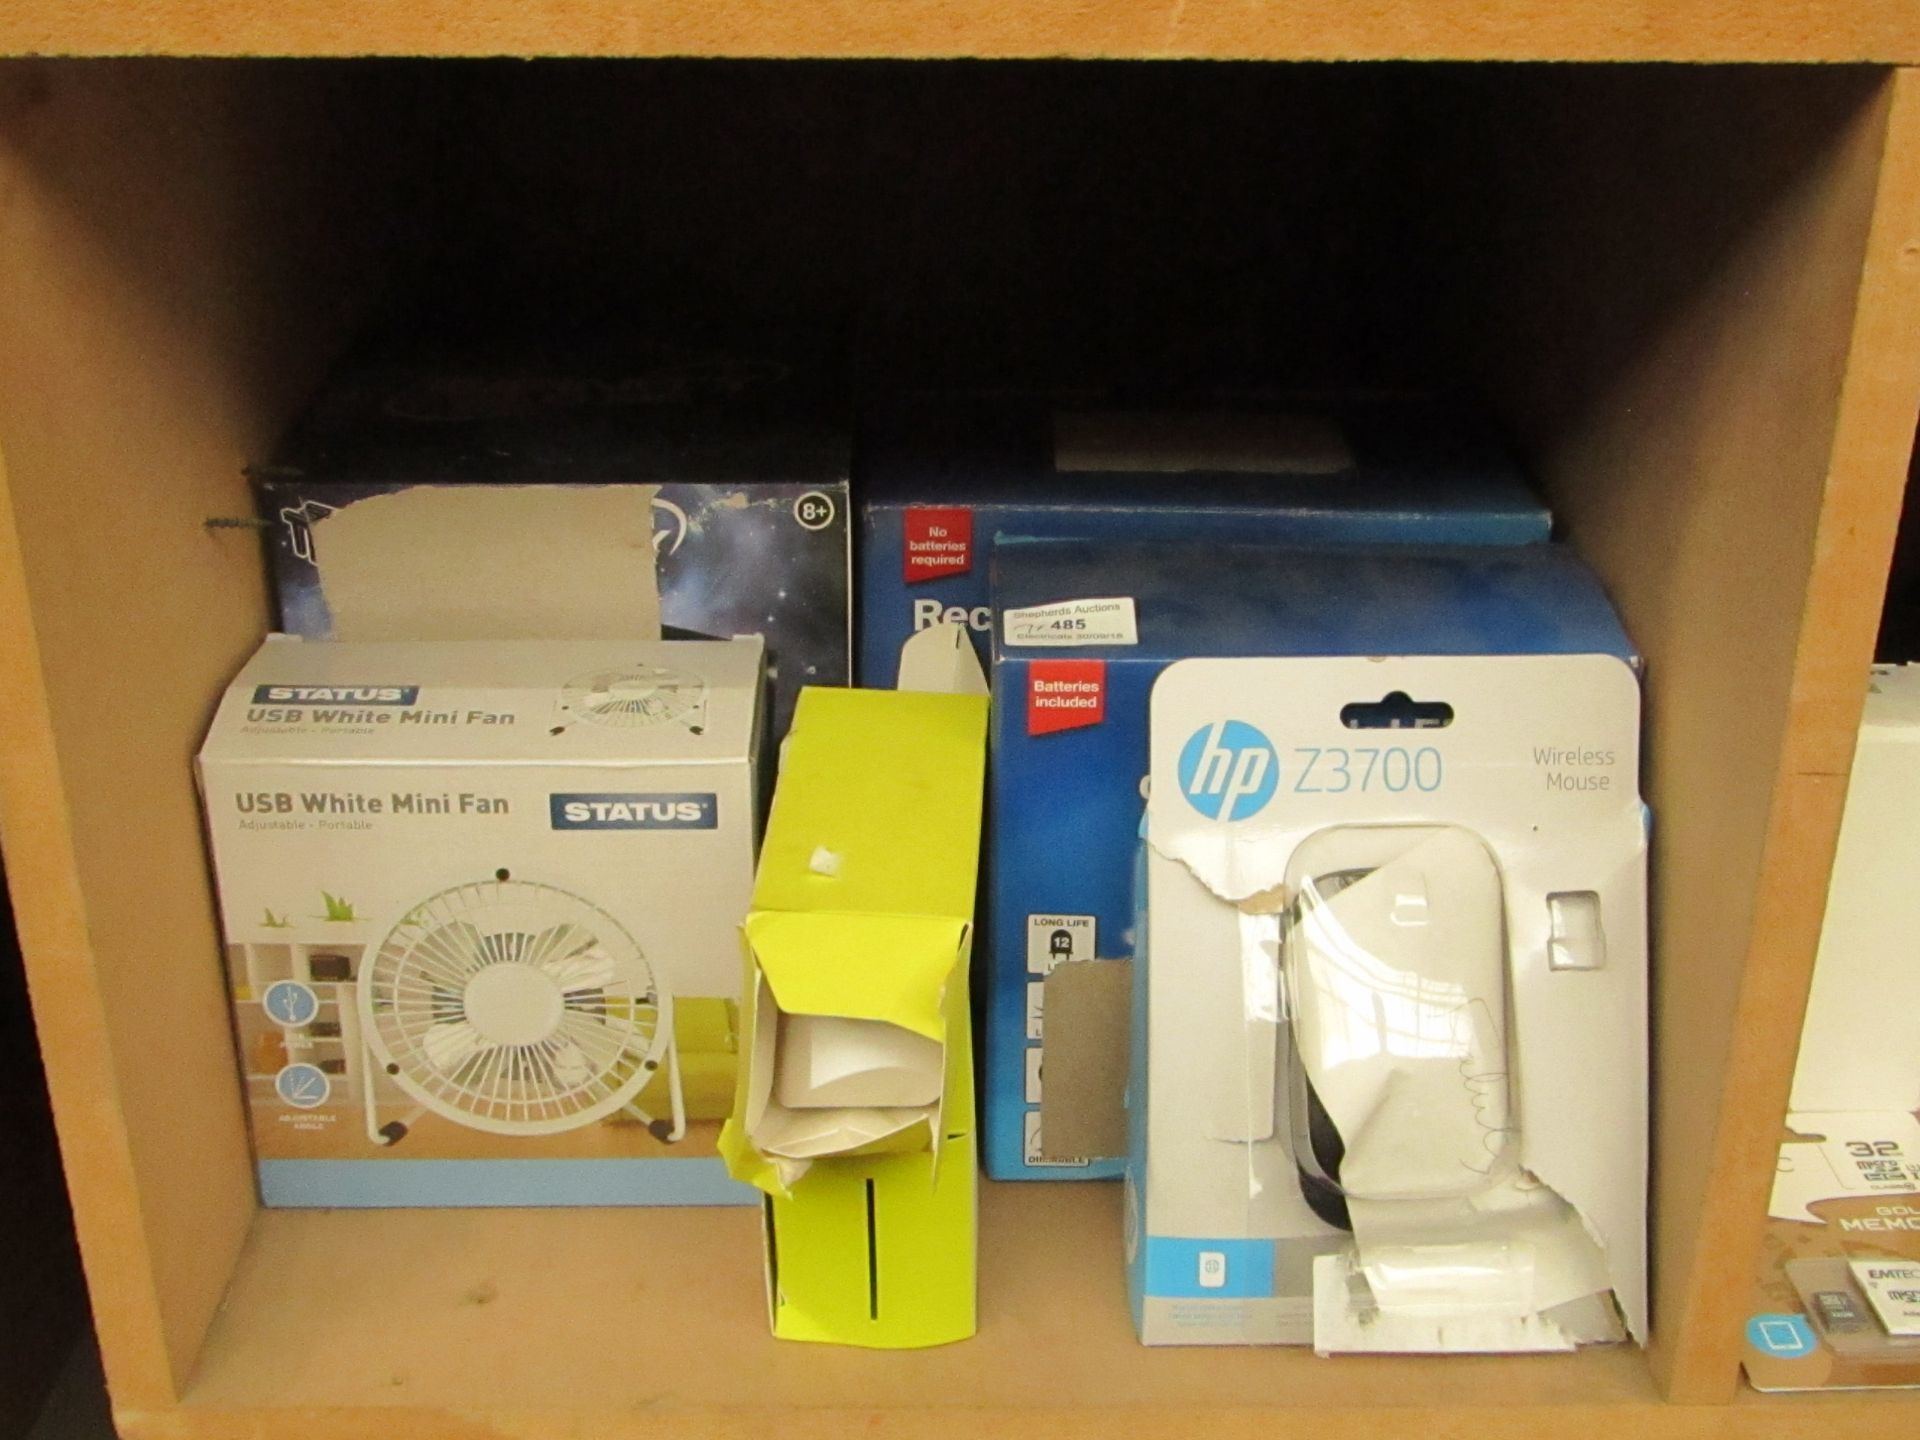 7x Unchecked items which include, Infinity cube light, mini USB fan, Wirelss Mouse, wireless